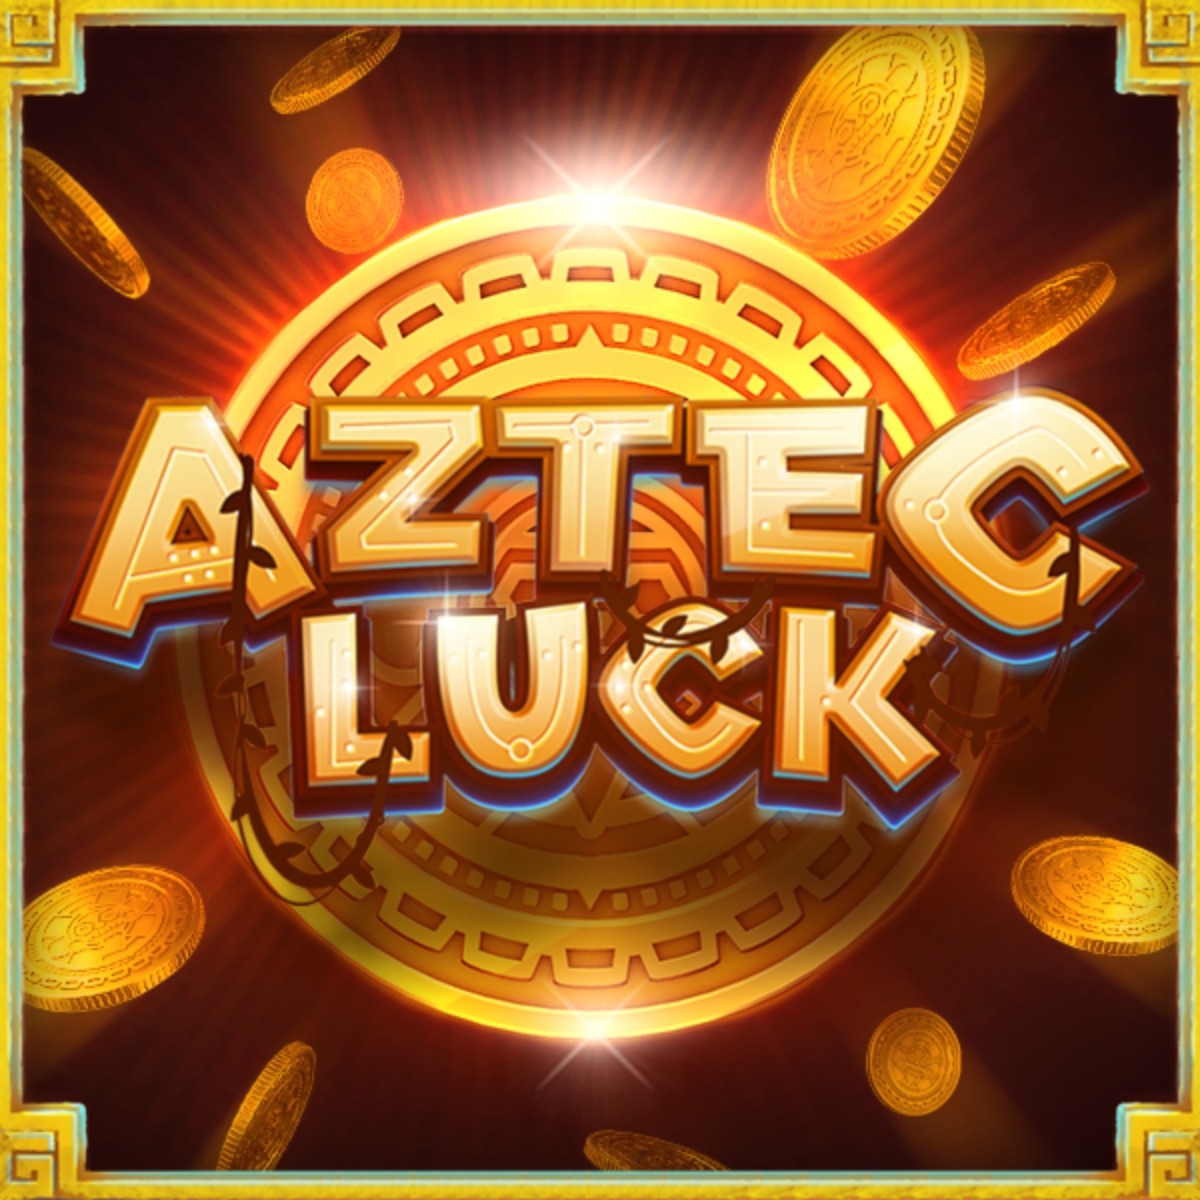 The Aztec Luck Online Slot Demo Game by Silverback Gaming